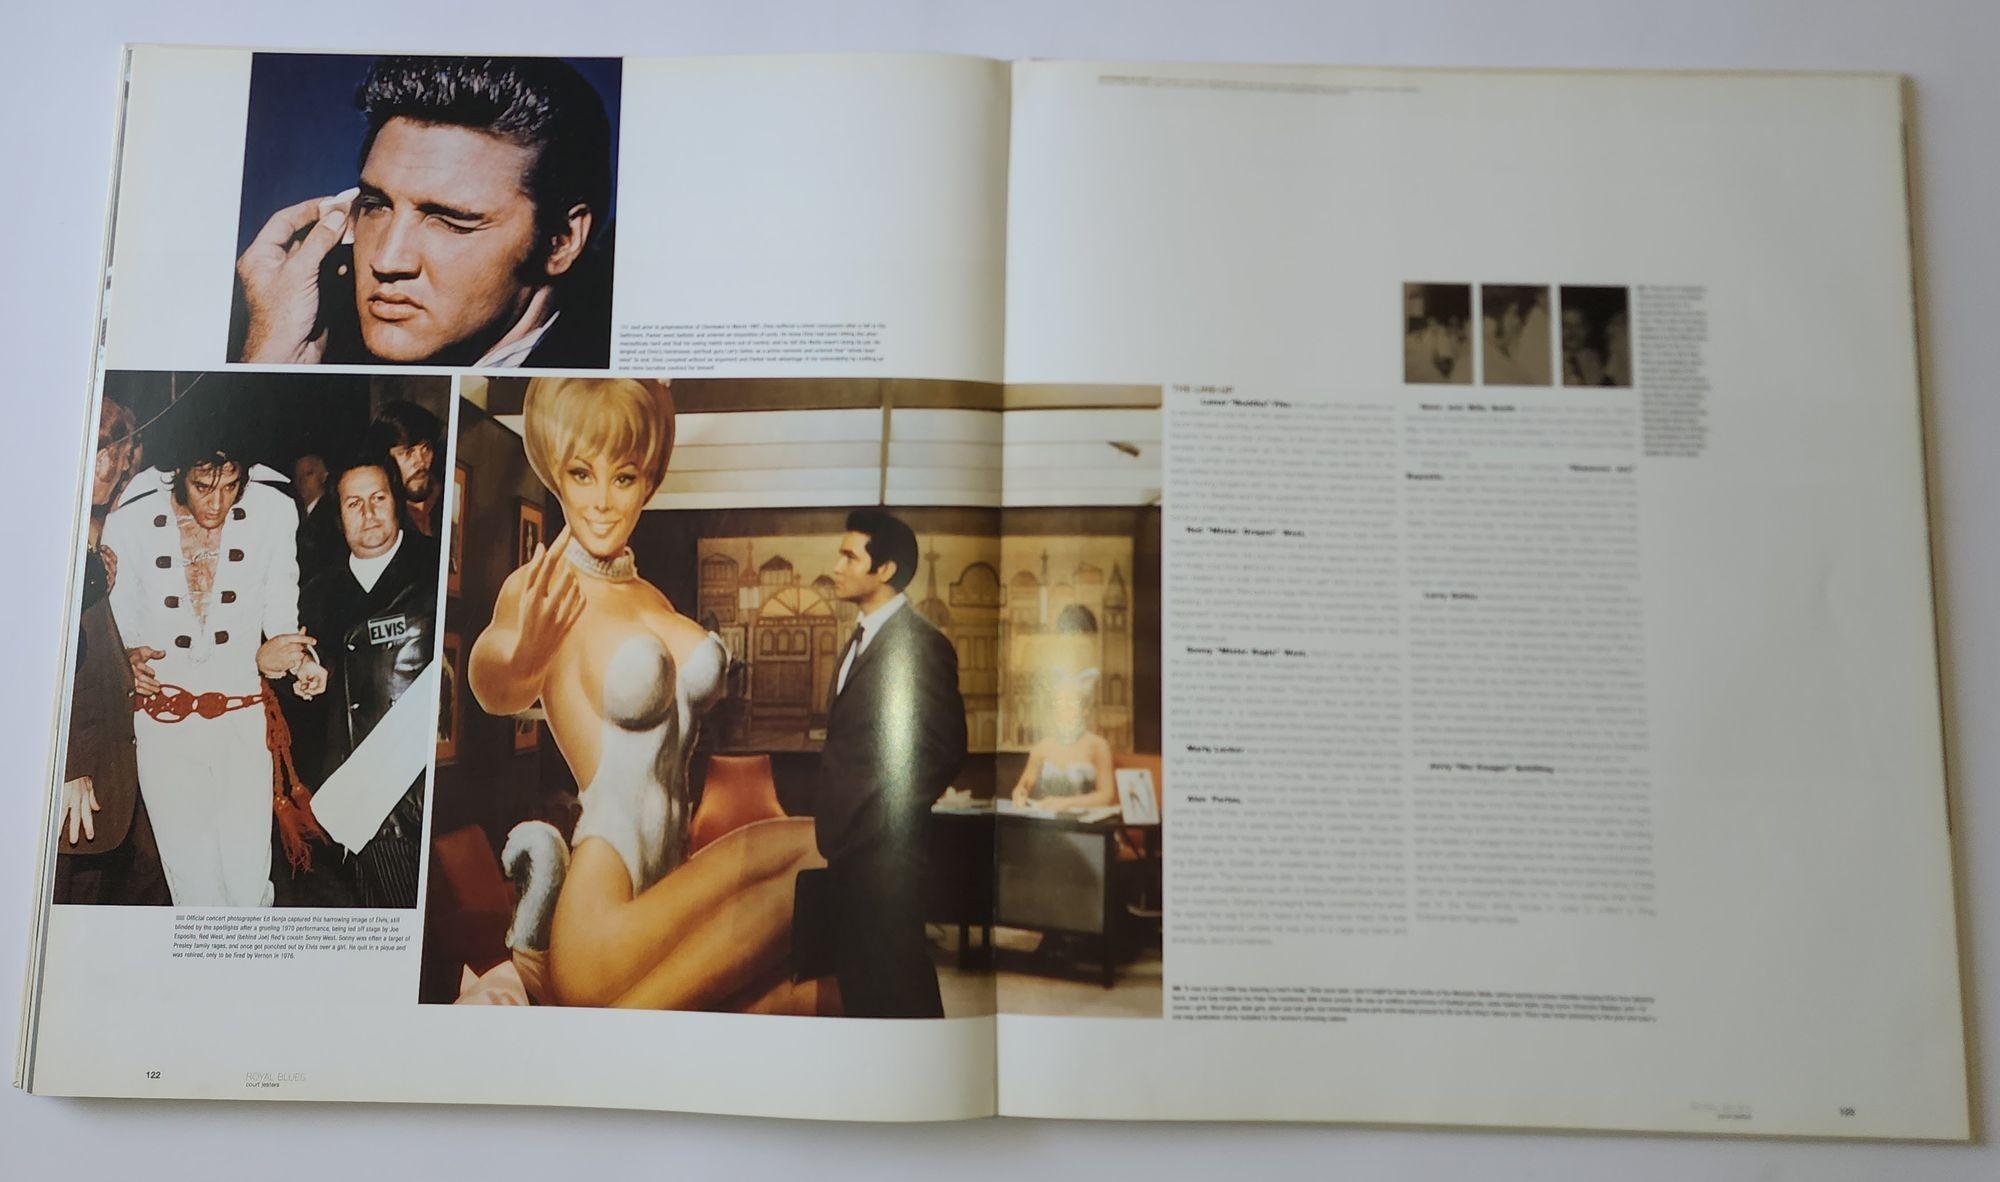 The King by Jim Piazza Elvis Presley - Large size coffee table book For Sale 8